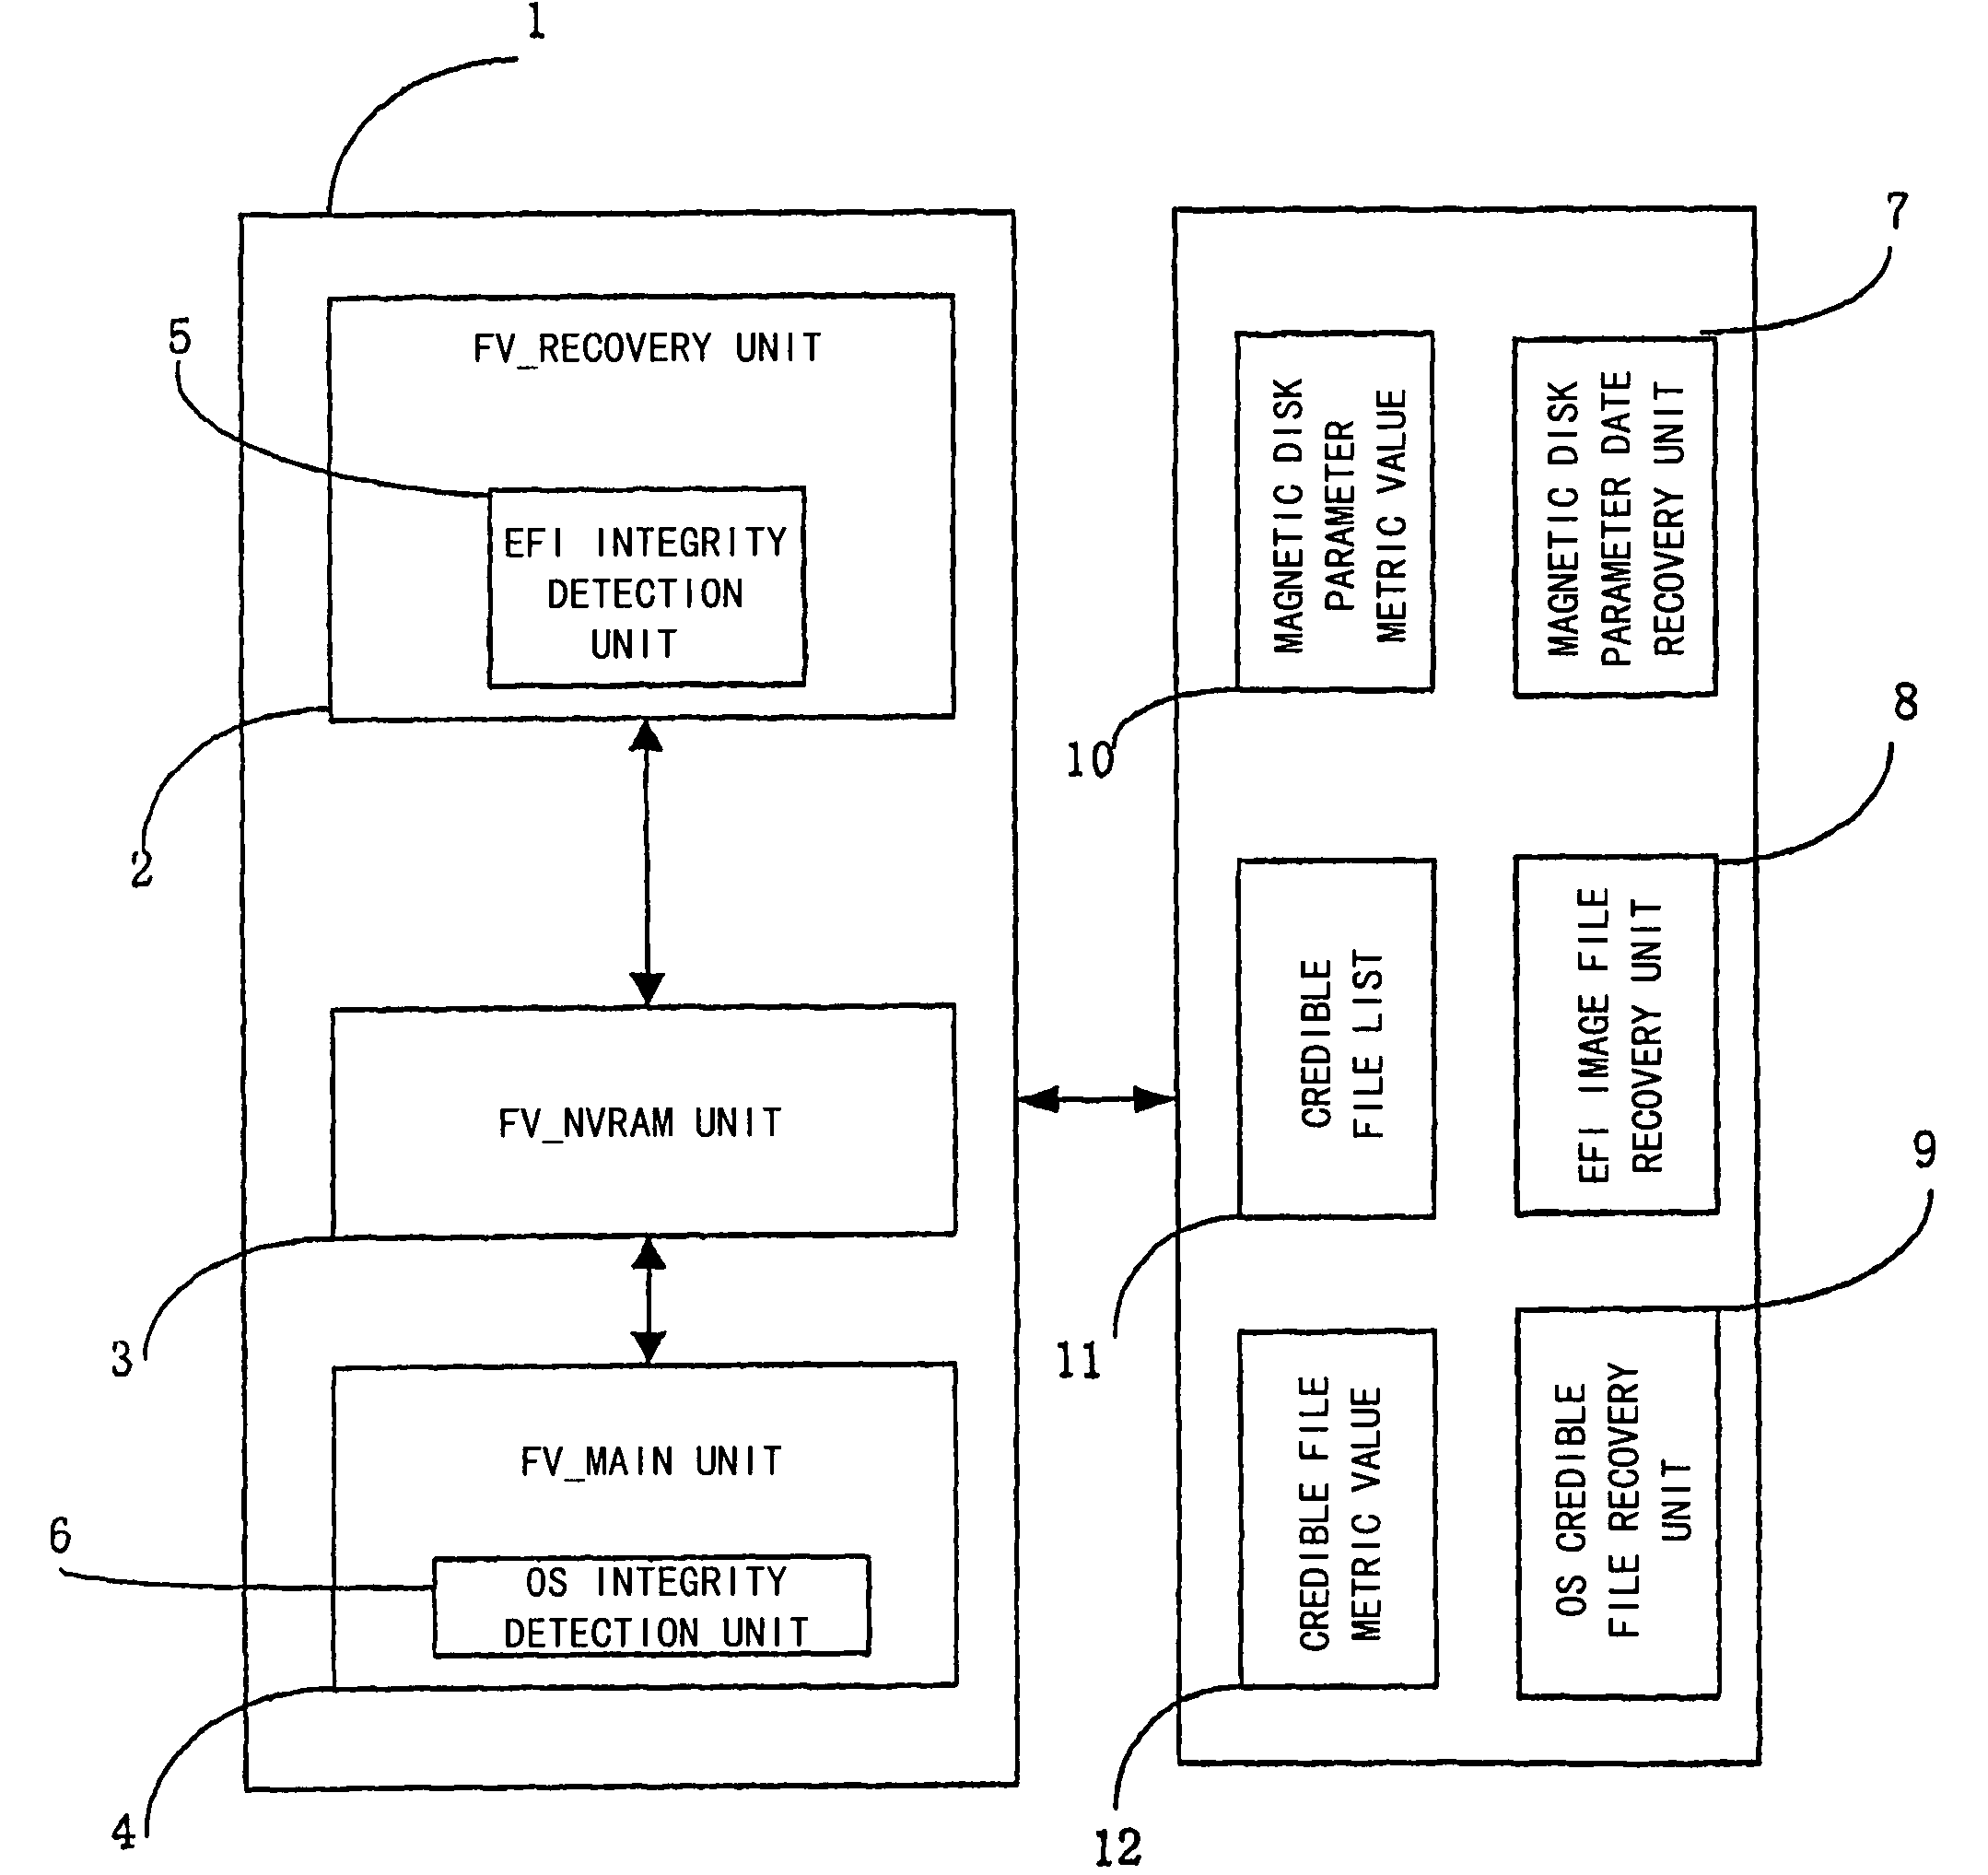 Computer system and method for performing integrity detection on the same